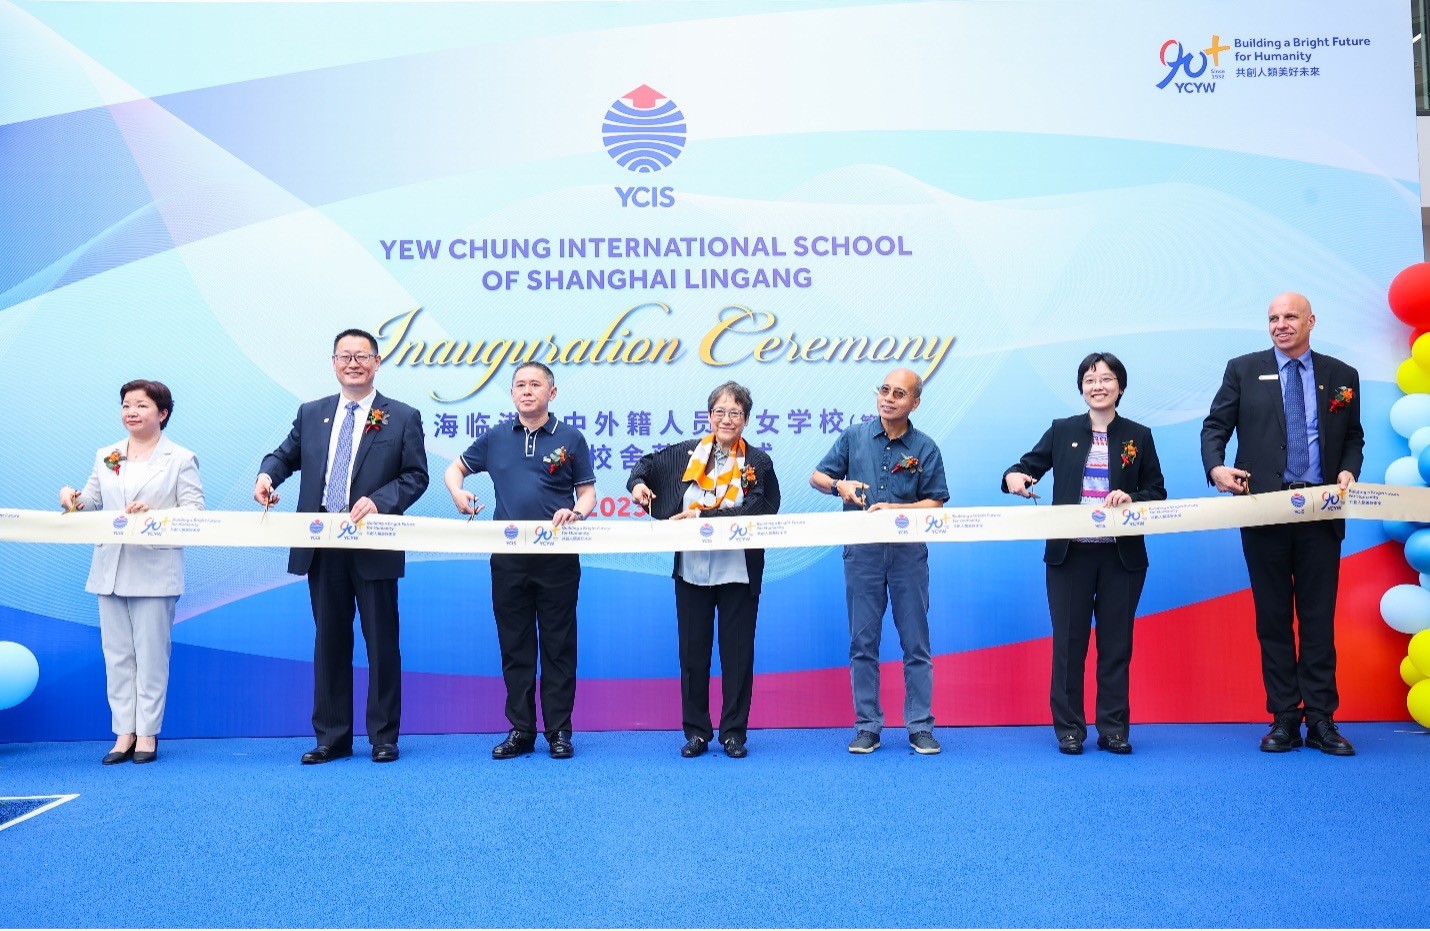 Ribbon-cutting ceremony for the inauguration of YCIS Shanghai Lingang 